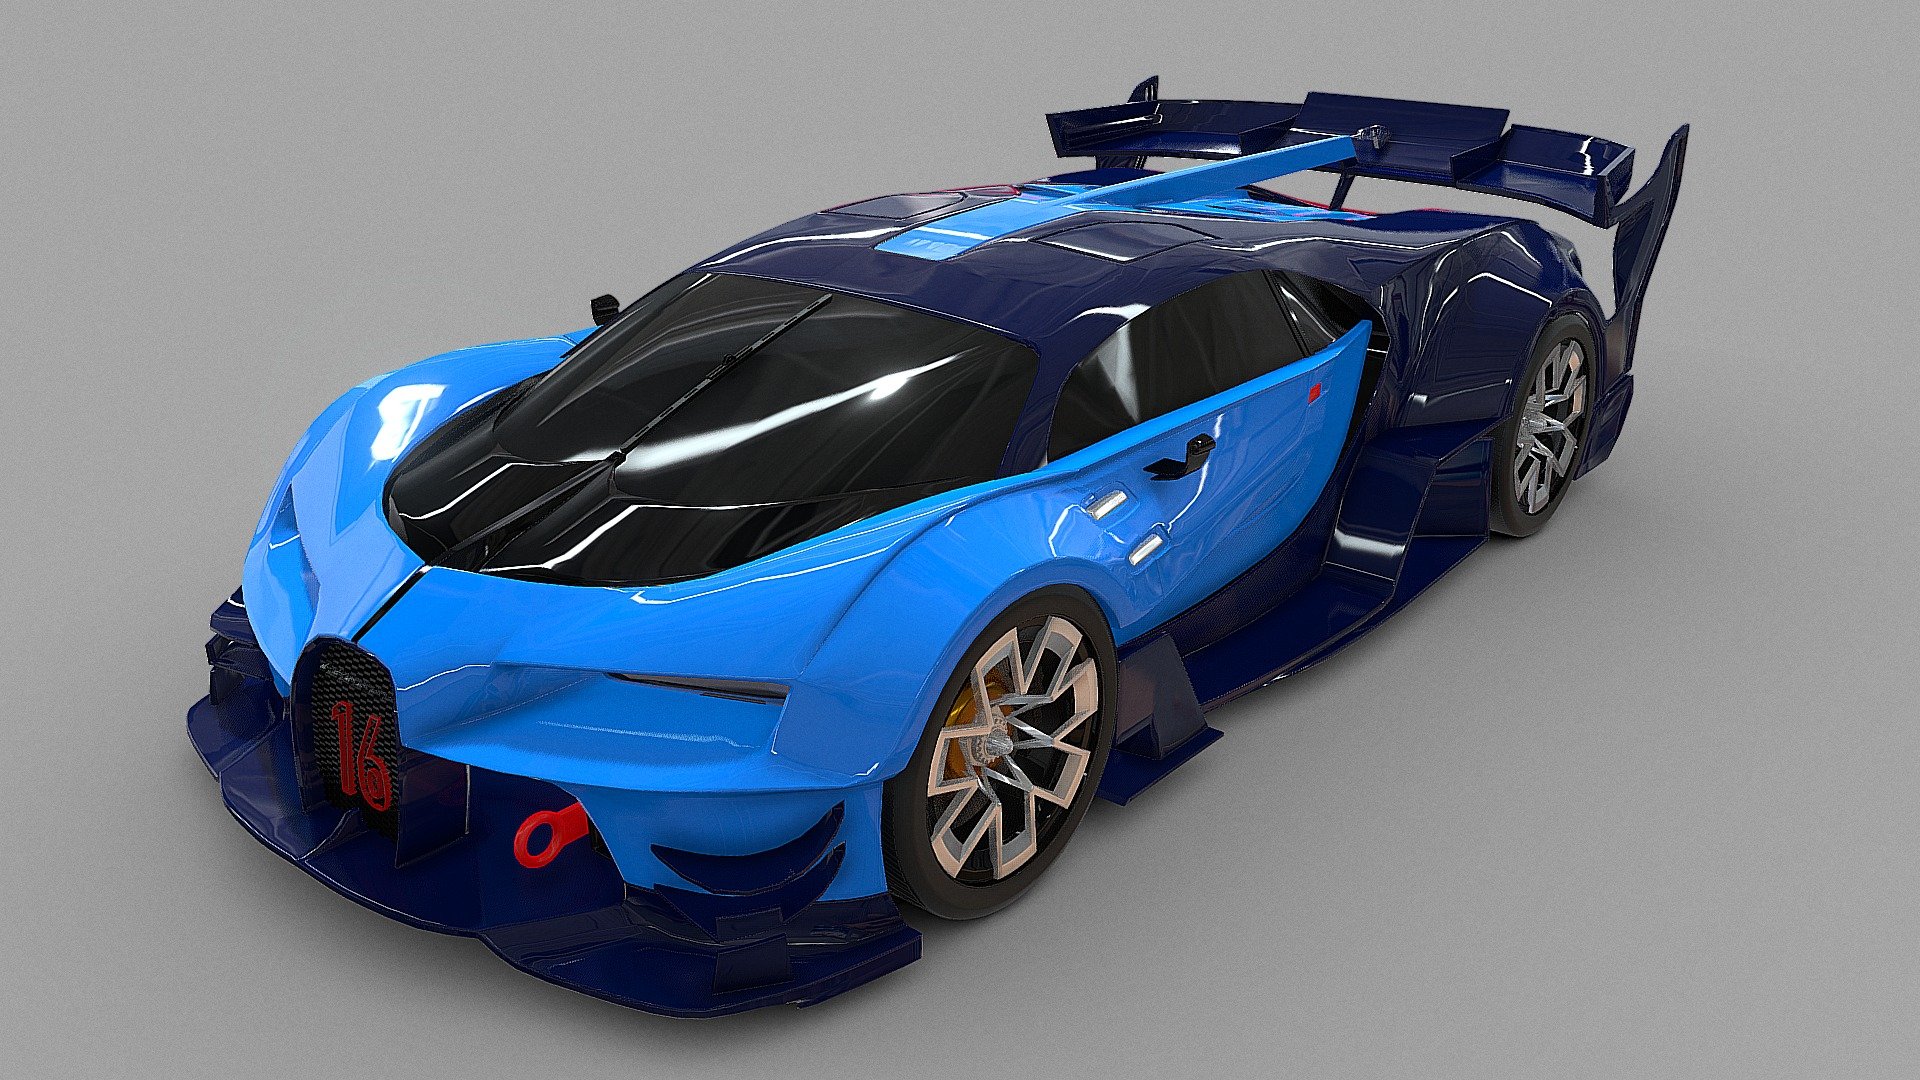 This is a Bugatti Chiron Limited Edition ( Vision GT ) . This asset was modelled in maya and textured in Substance painter. To see more Work please visit my instagram profile : https://www.instagram.com/art.rajat/?hl=en Stay tuned for more exciting upcoming 3D models .... &amp; feel free to suggest what you want to get next 3d model